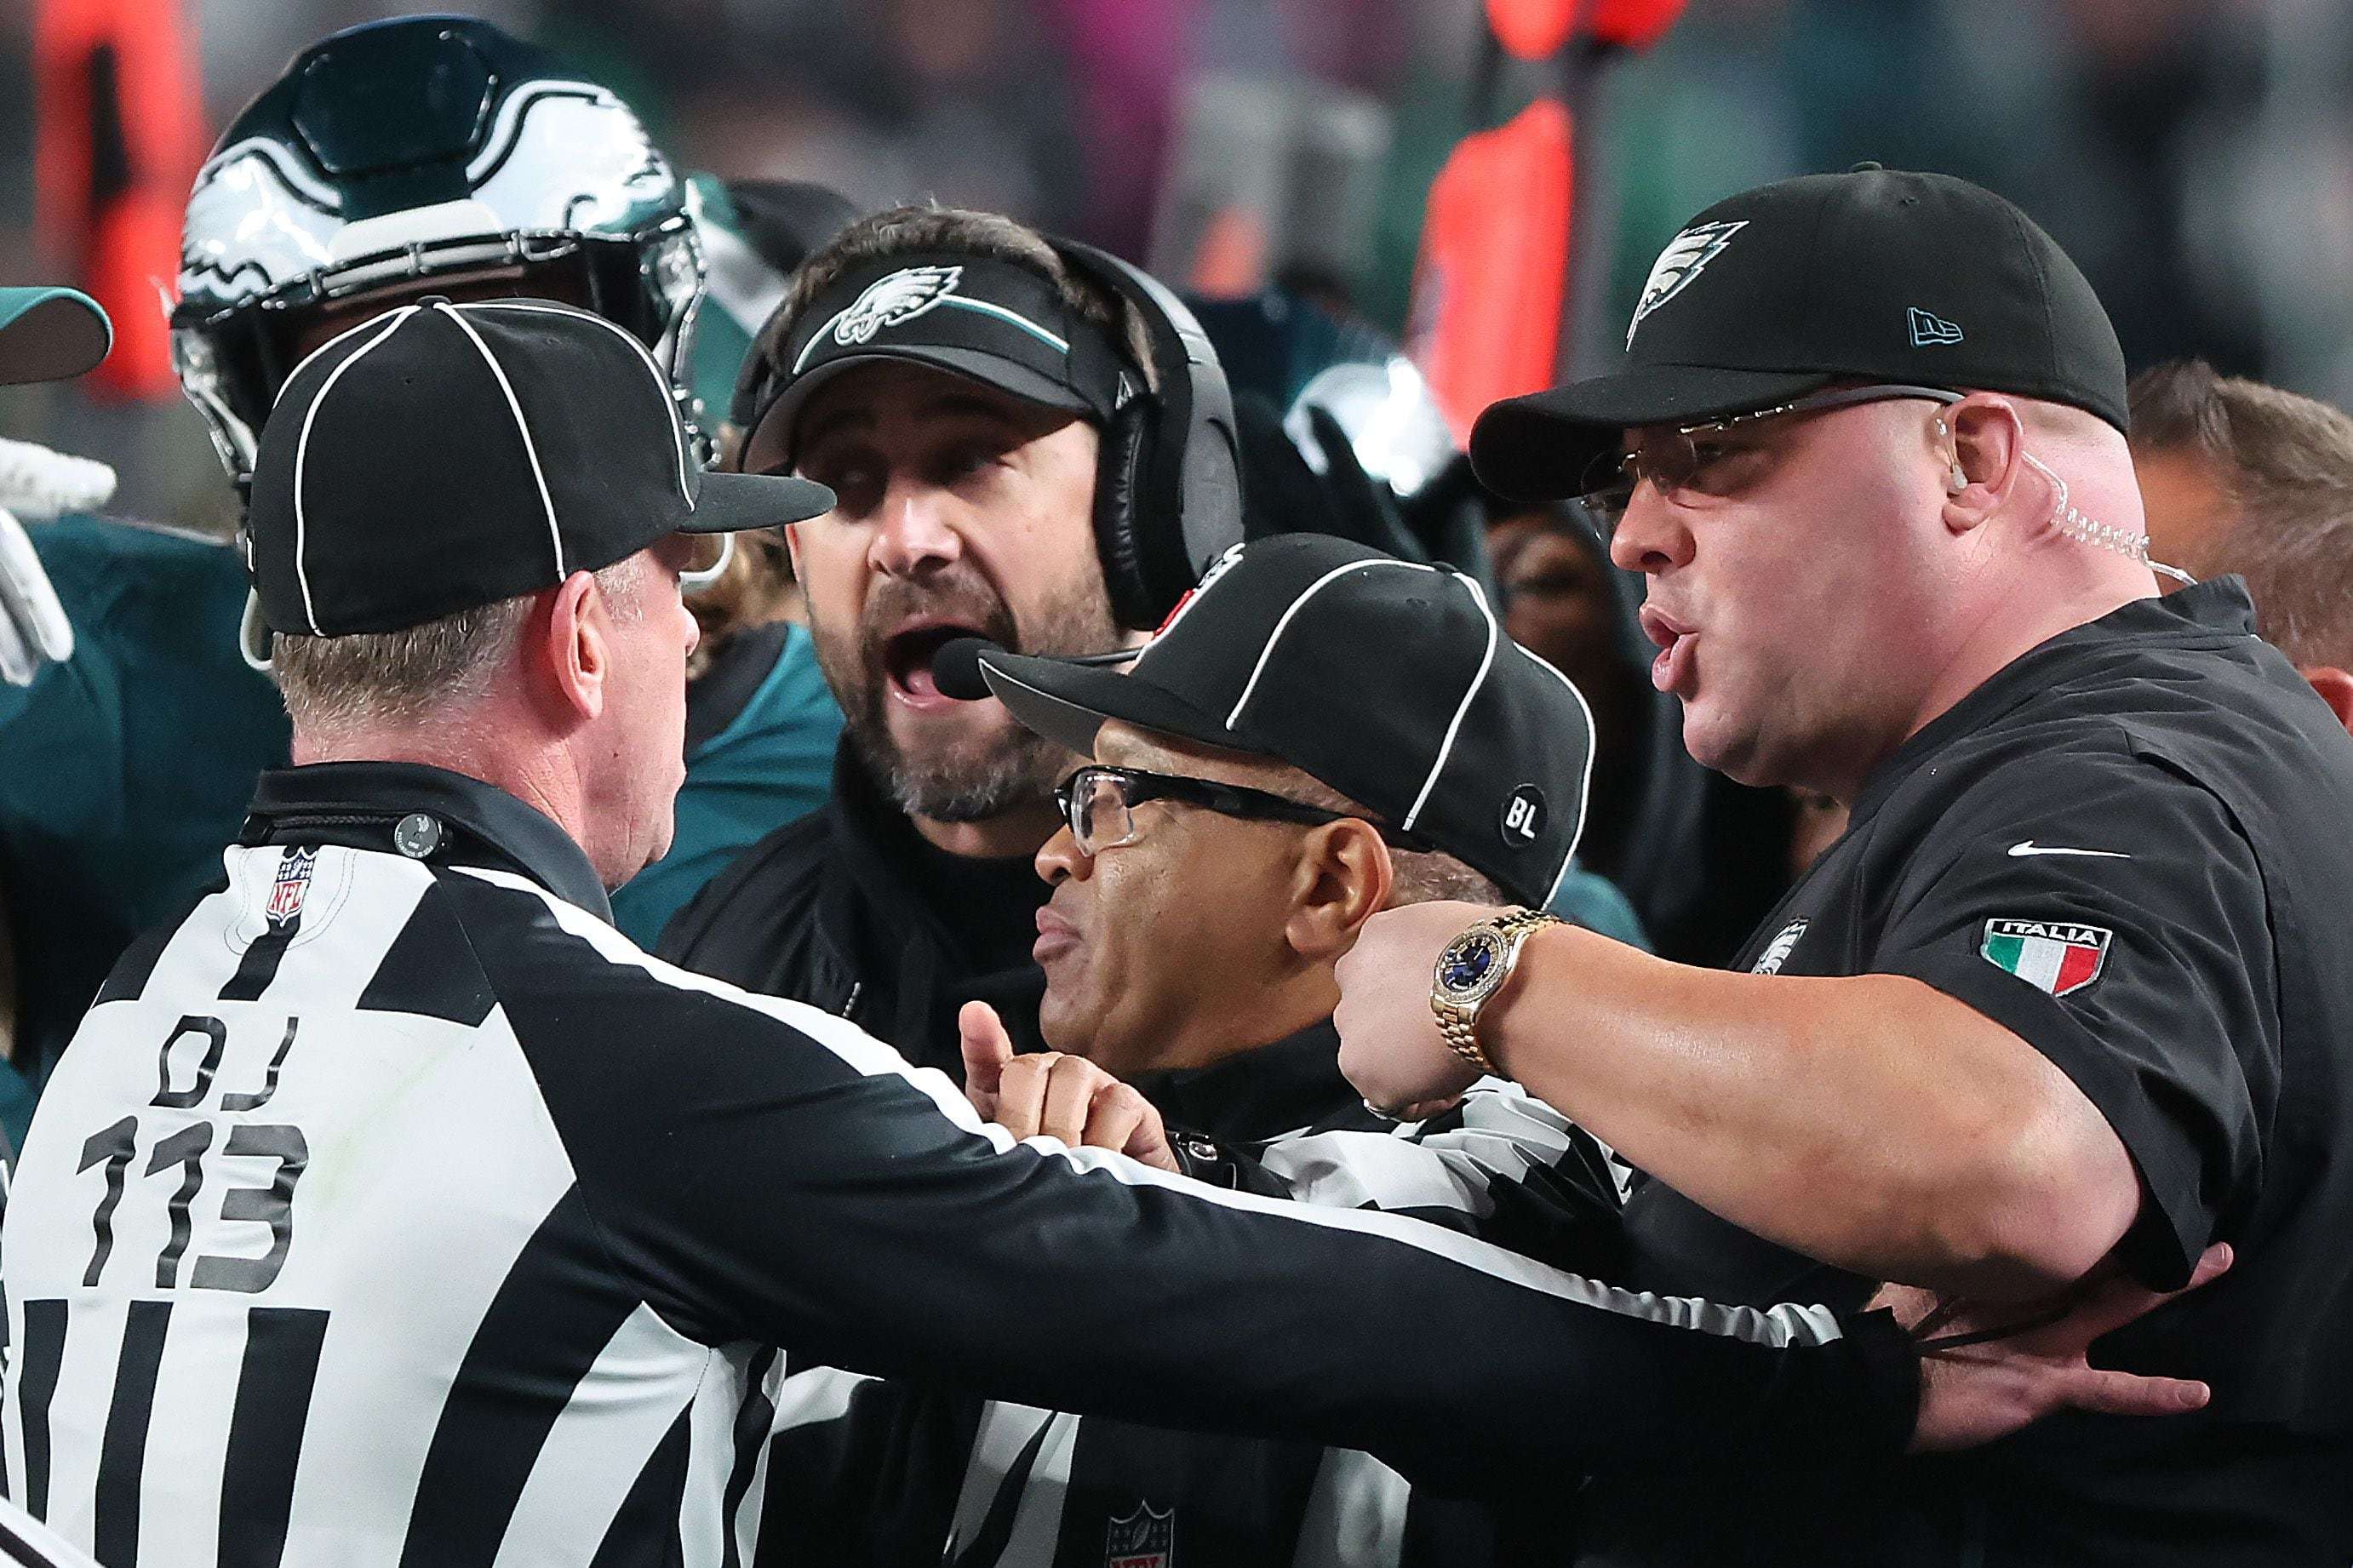 if nick sirianni wants to save his career as the eagles’ coach, he needs to learn to calm down